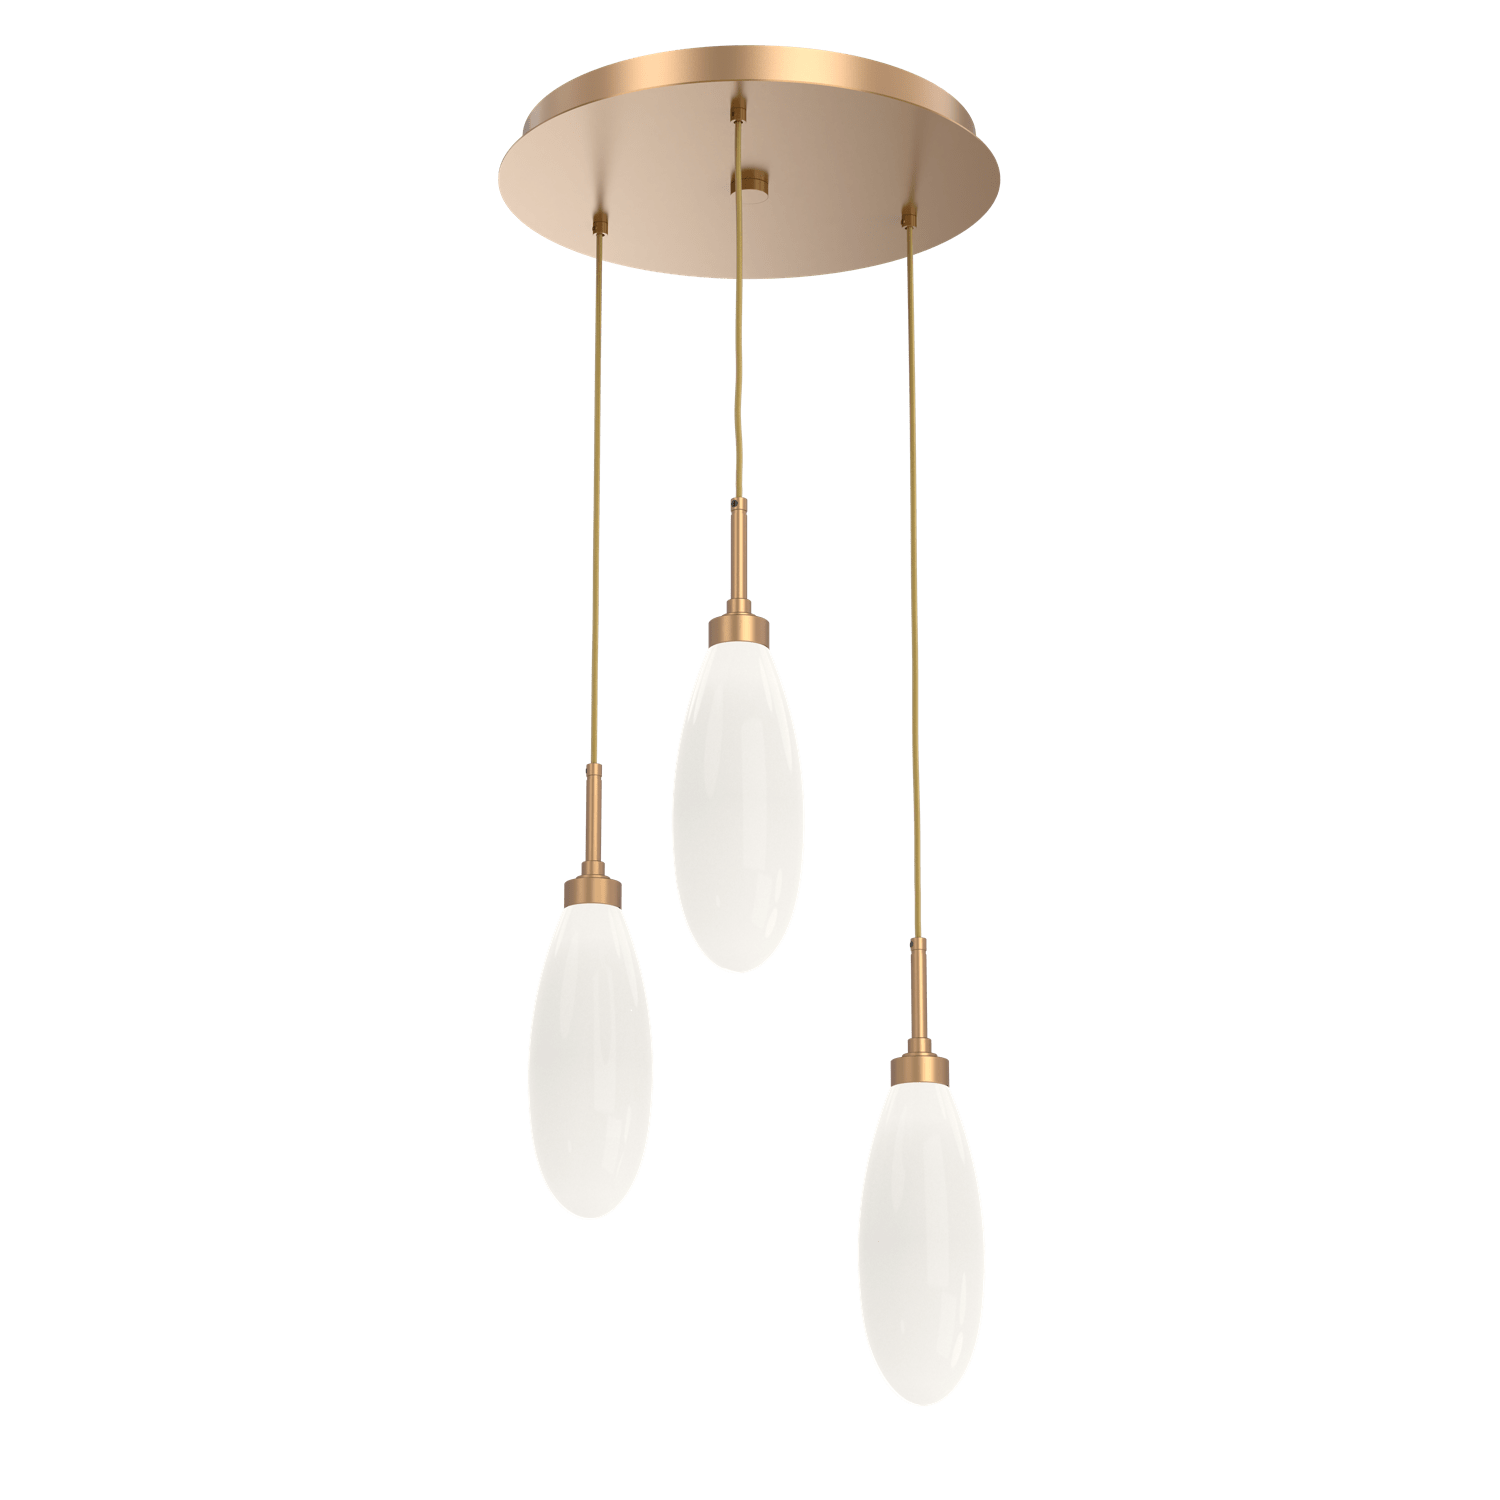 CHB0071-03-NB-WL-LL-Hammerton-Studio-Fiori-3-light-round-pendant-chandelier-with-novel-brass-finish-and-opal-white-glass-shades-and-LED-lamping